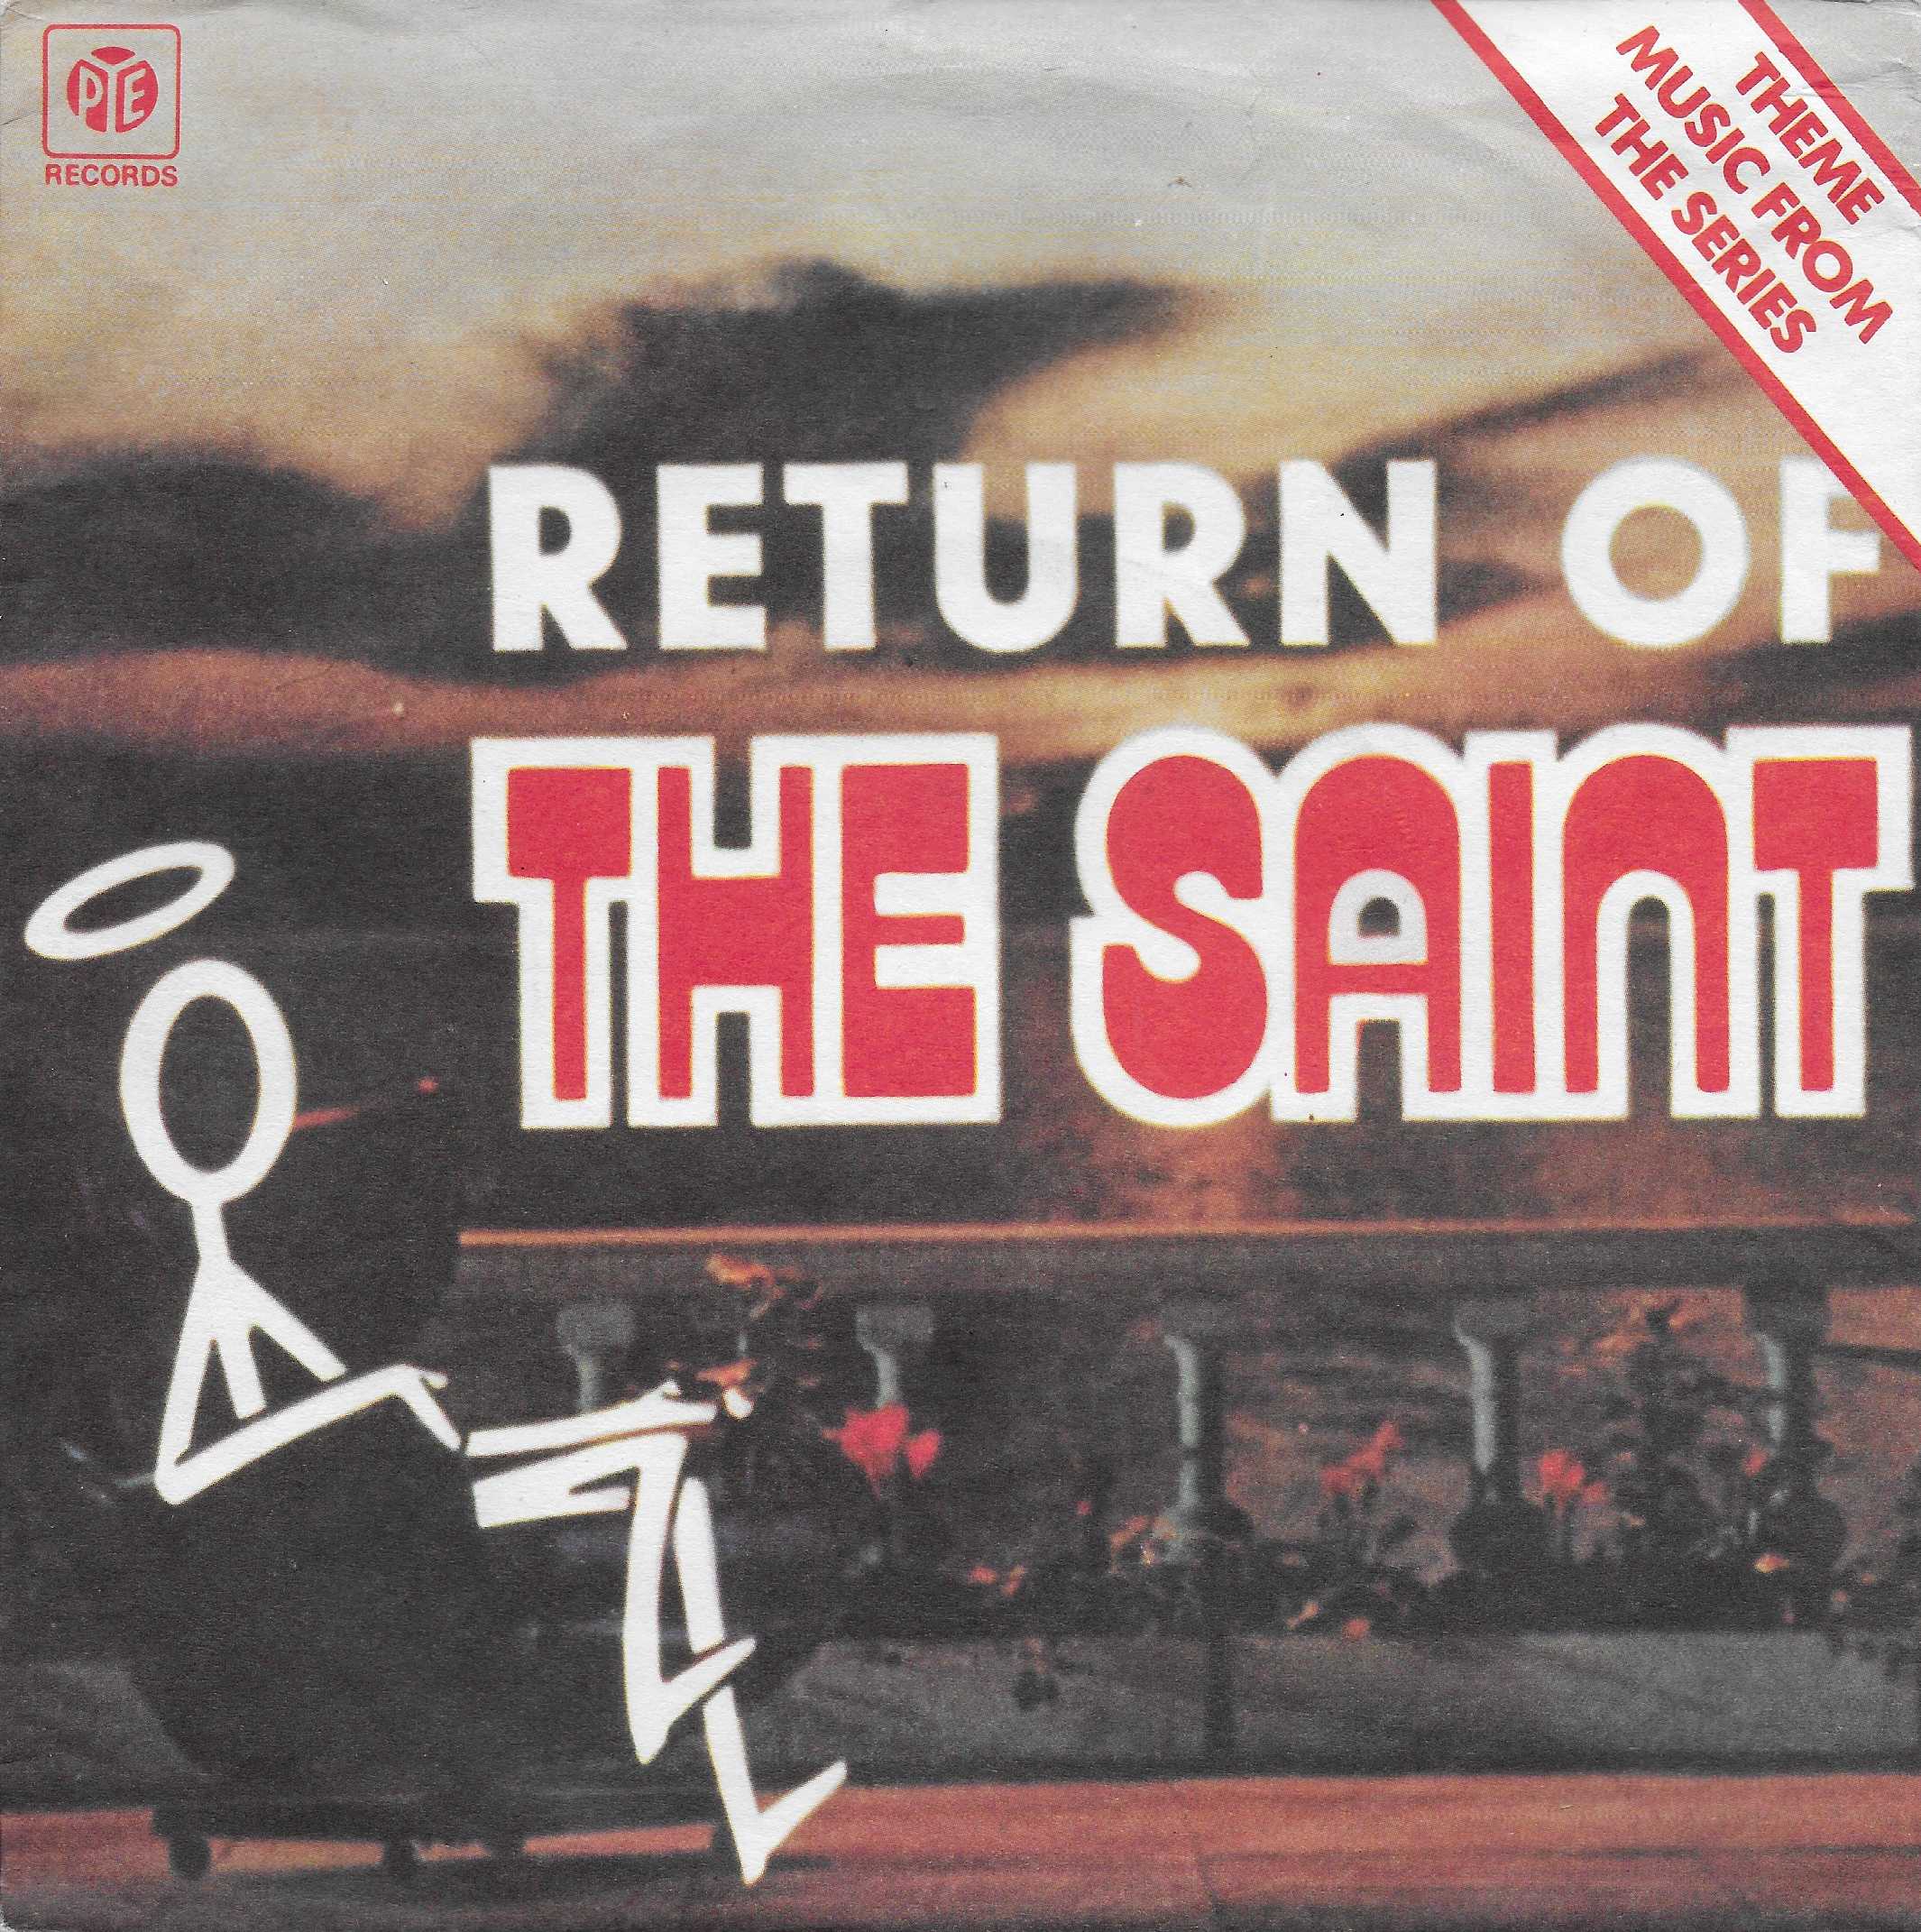 Picture of 7 N 46127 Return of the saint by artist Brian Dee / Irving Martin from ITV, Channel 4 and Channel 5 singles library